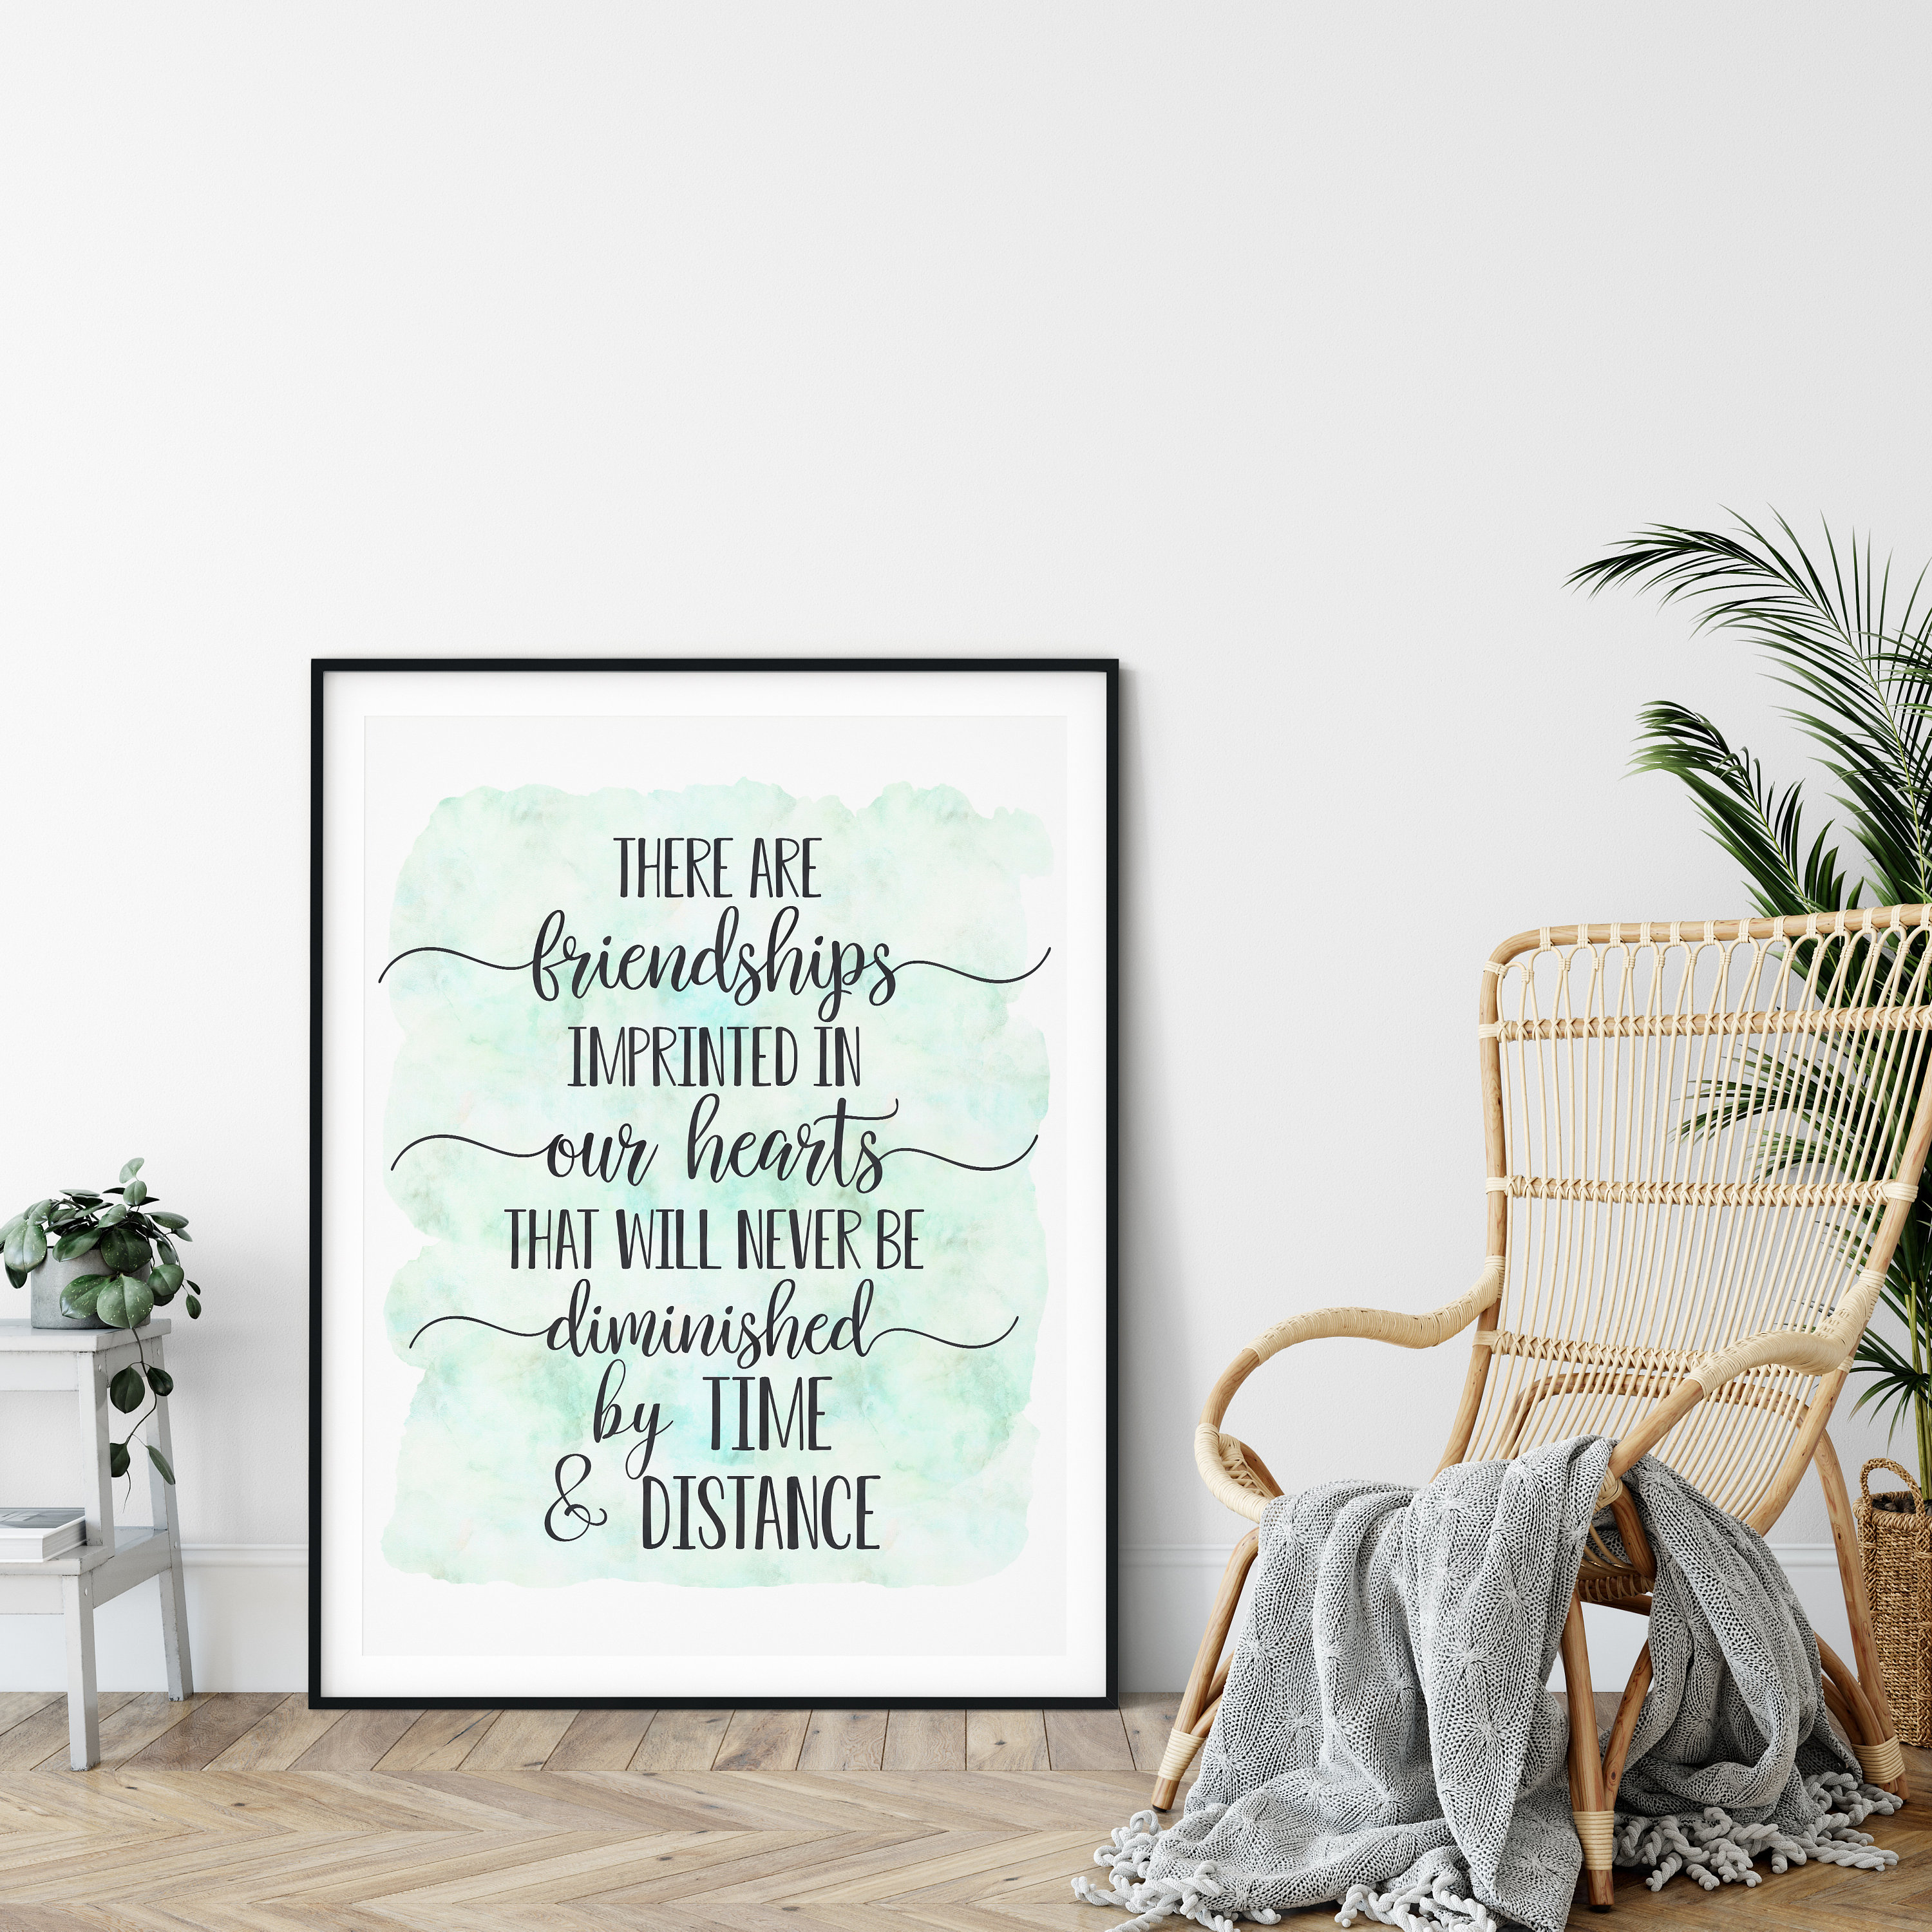 Friendships Imprinted In Our Hearts,Nursery Print Wall Art,Inspirational Quotes